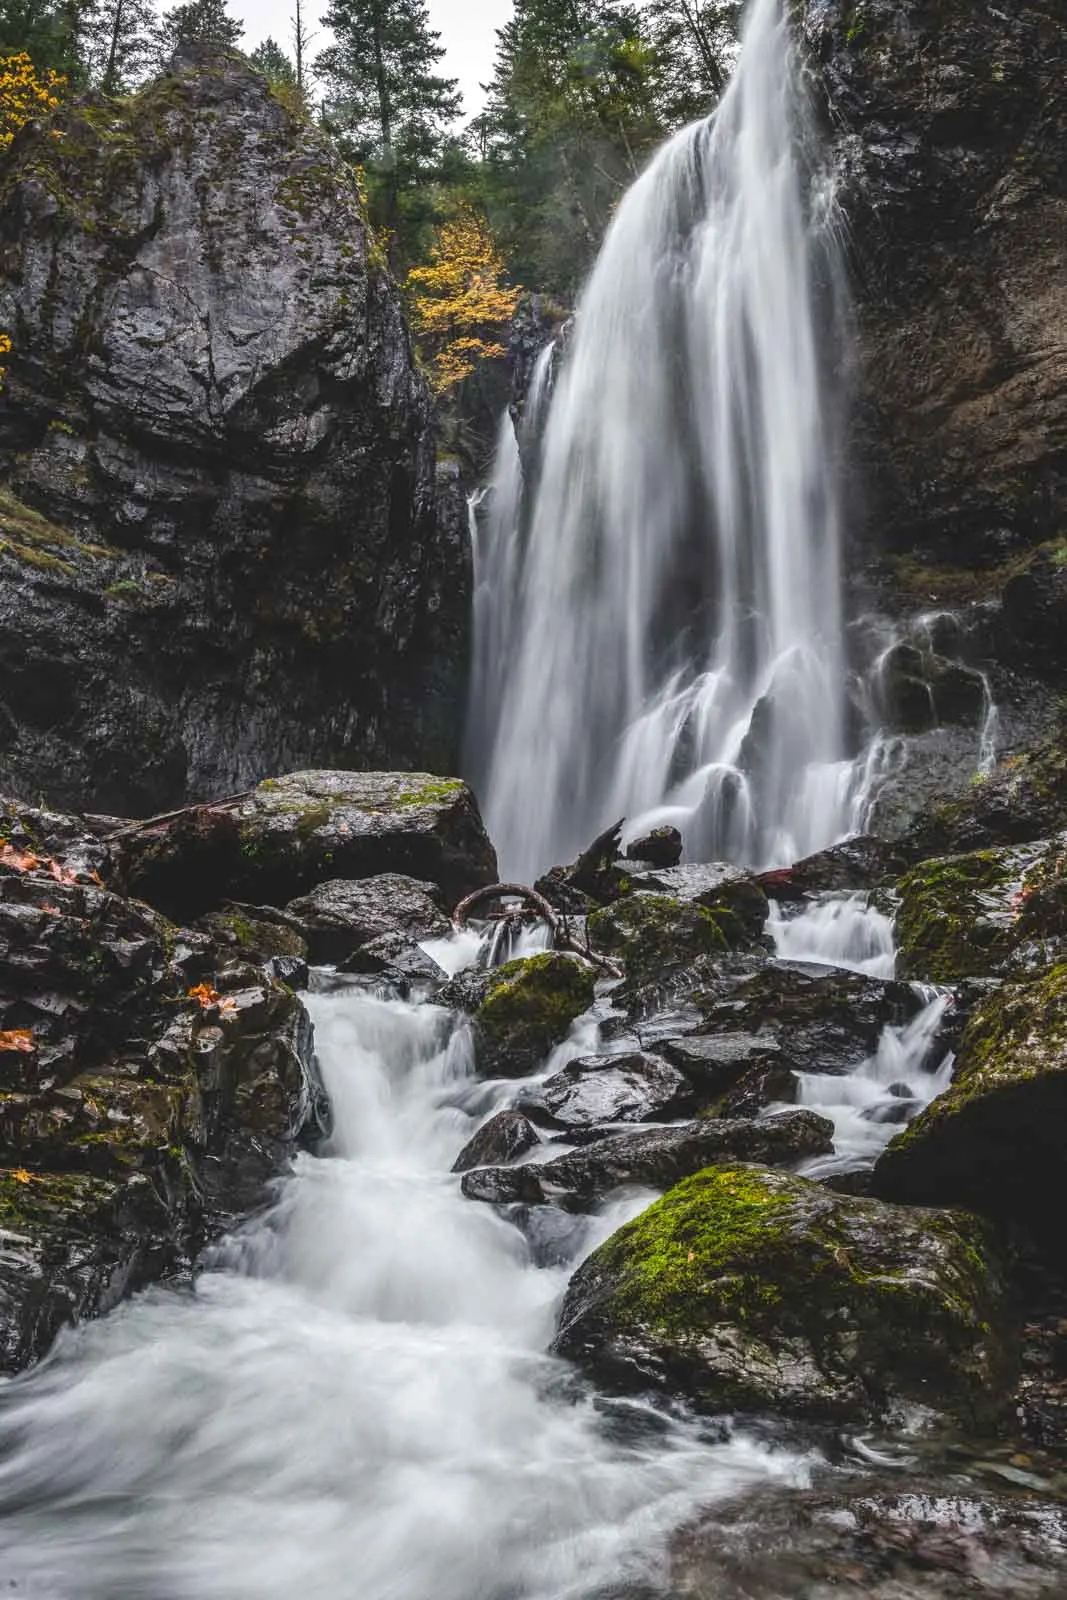 Henline Falls is a scenic and worthwhile Oregon waterfall hike.